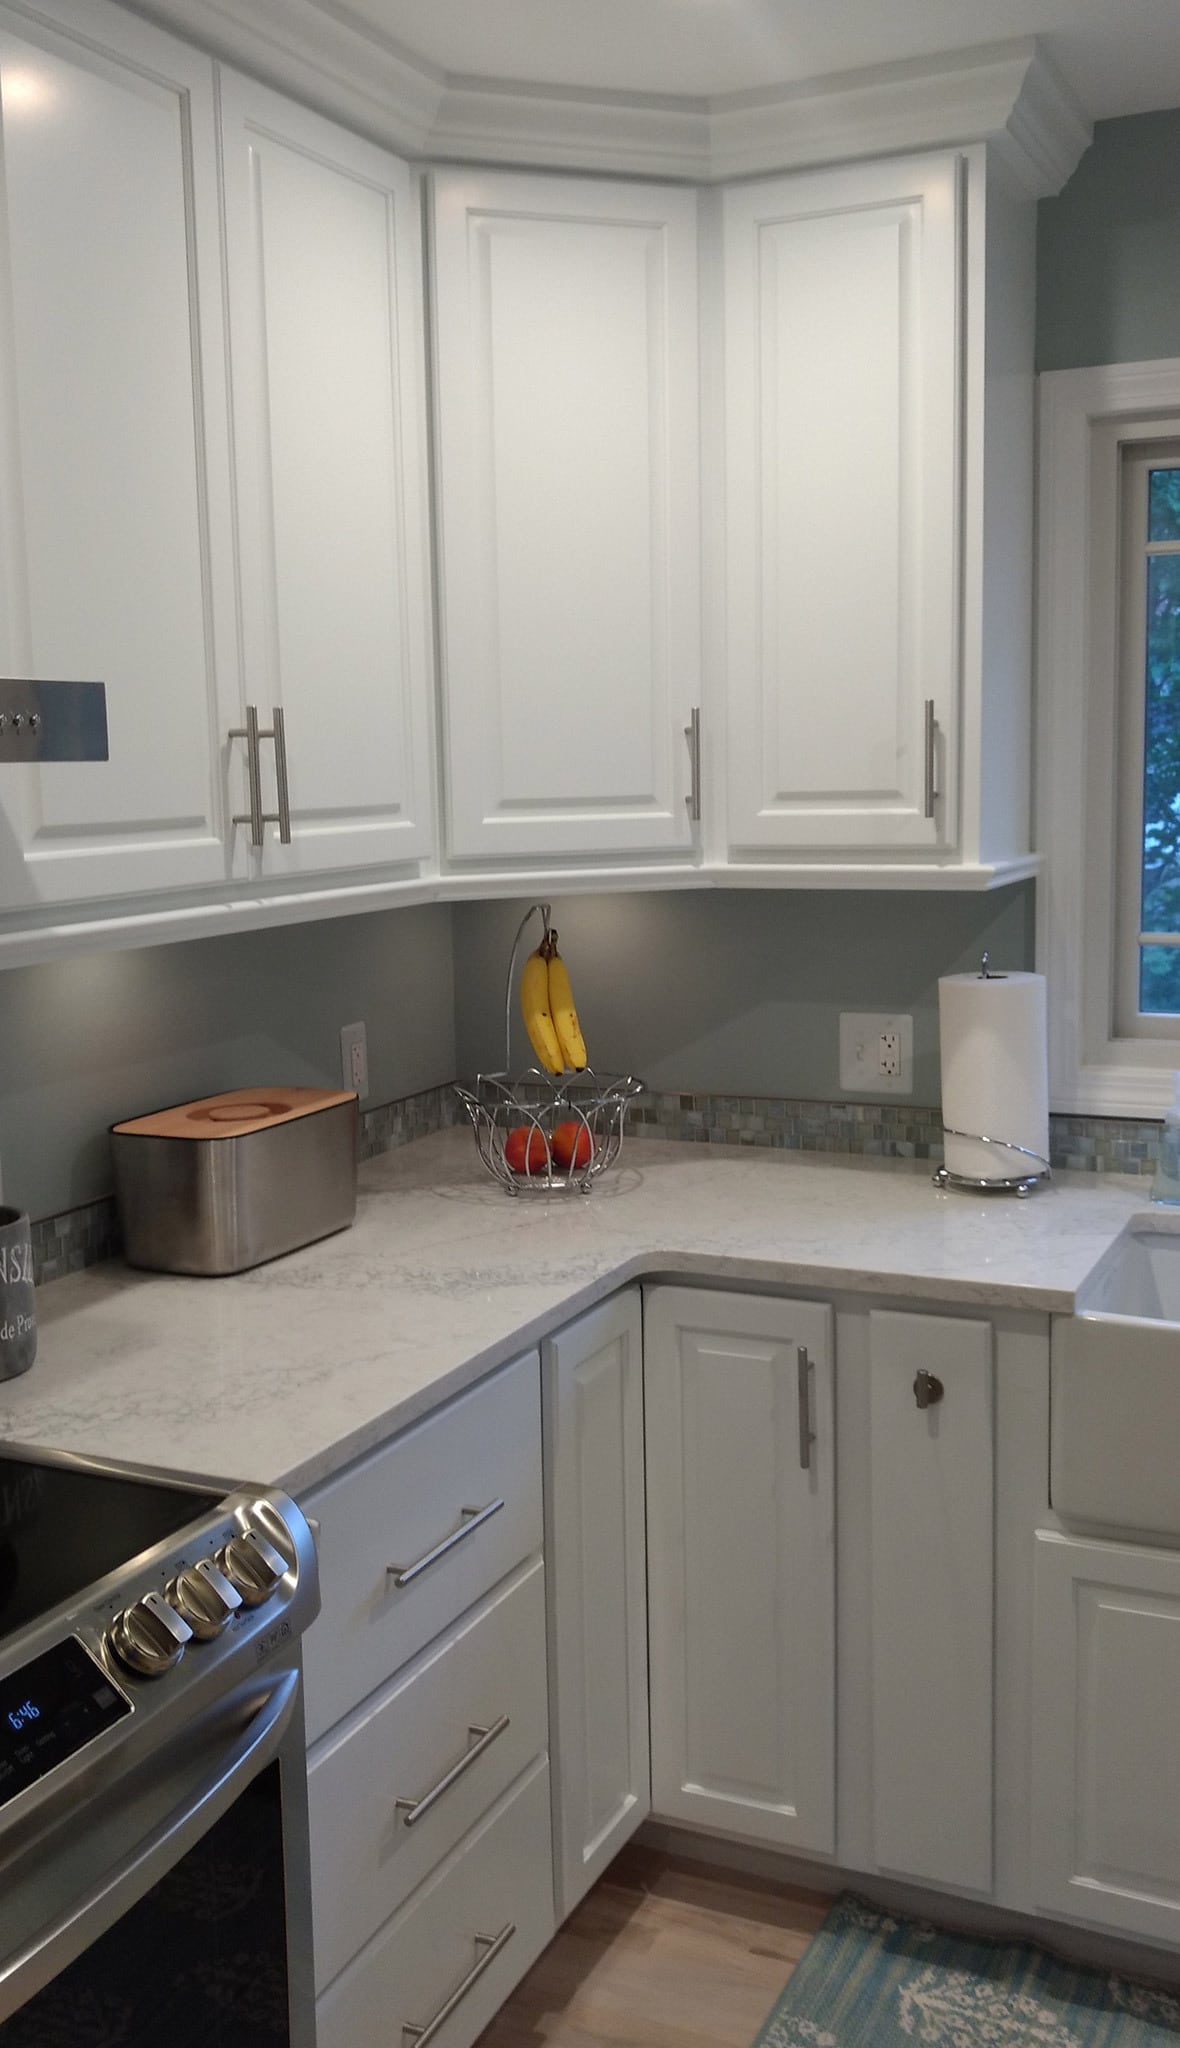 kitchen remodeling connecticut